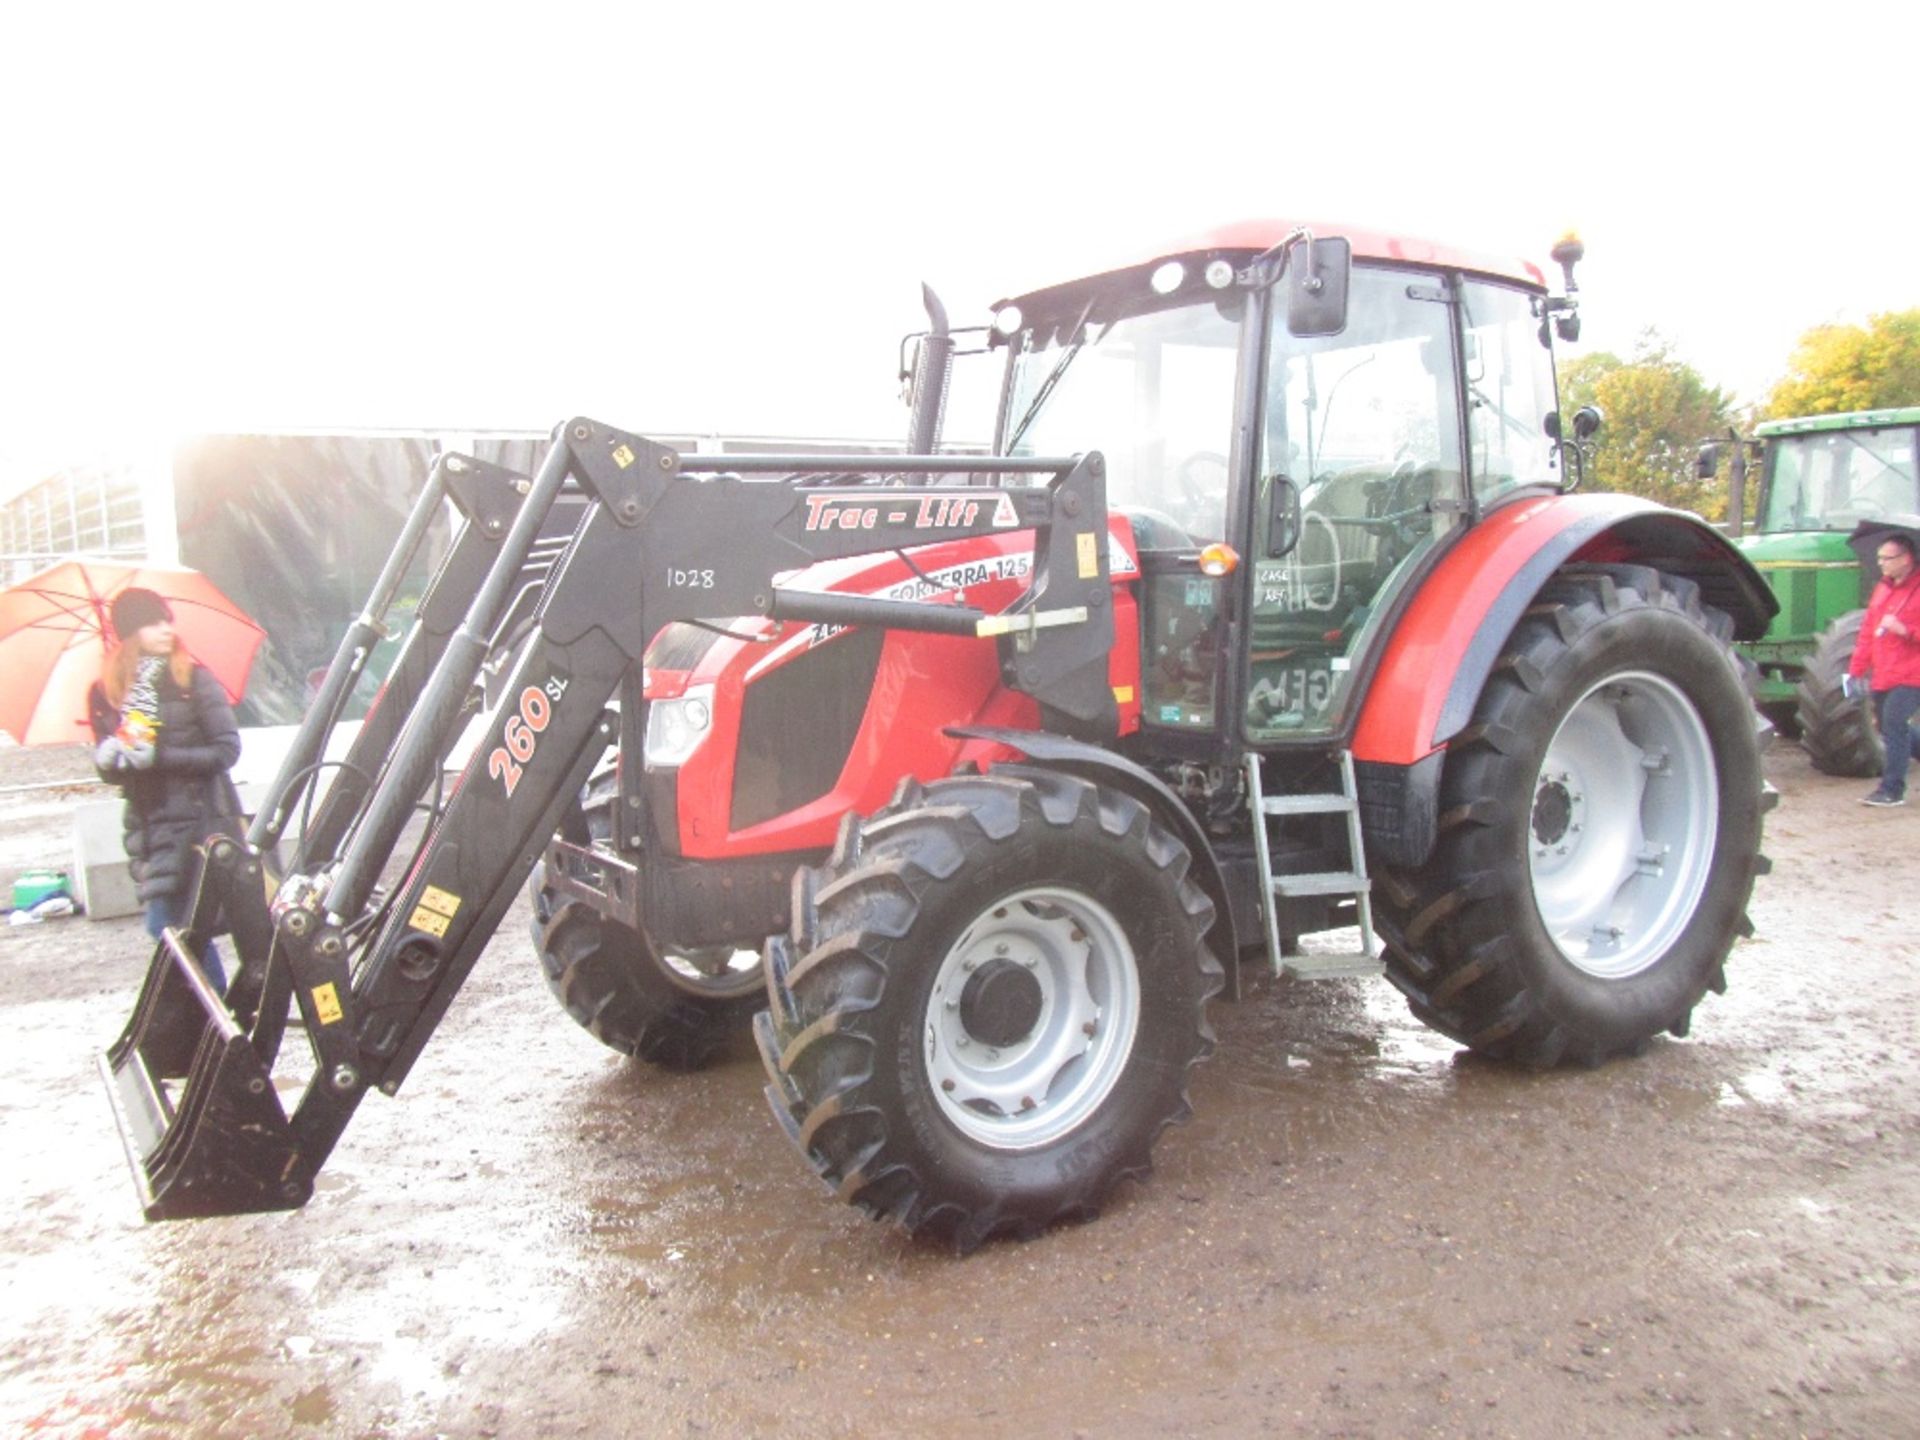 Zetor Forterra 125 4wd Tractor. 260 Trac Lift Loader. Reg Docs will be supplied. Reg. No. AE12 BKN. - Image 2 of 15